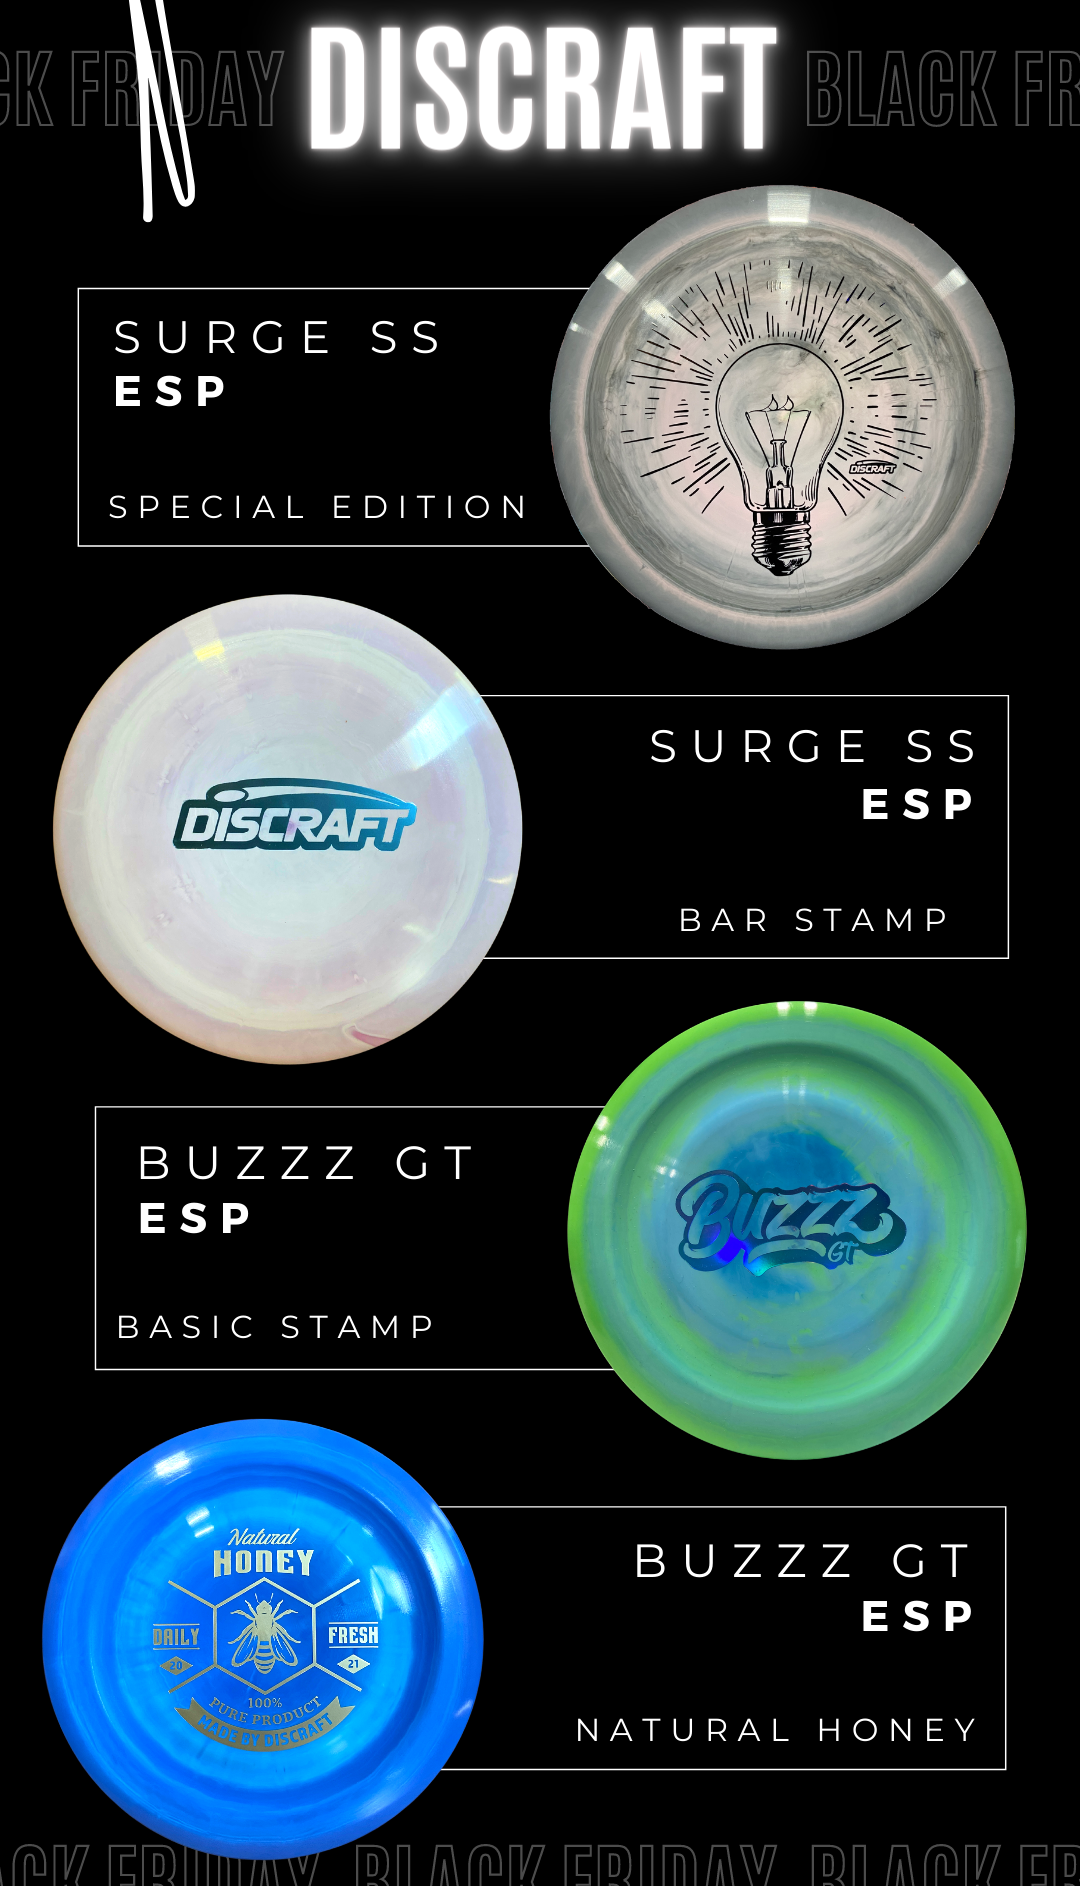 Black Friday Discraft releases #1